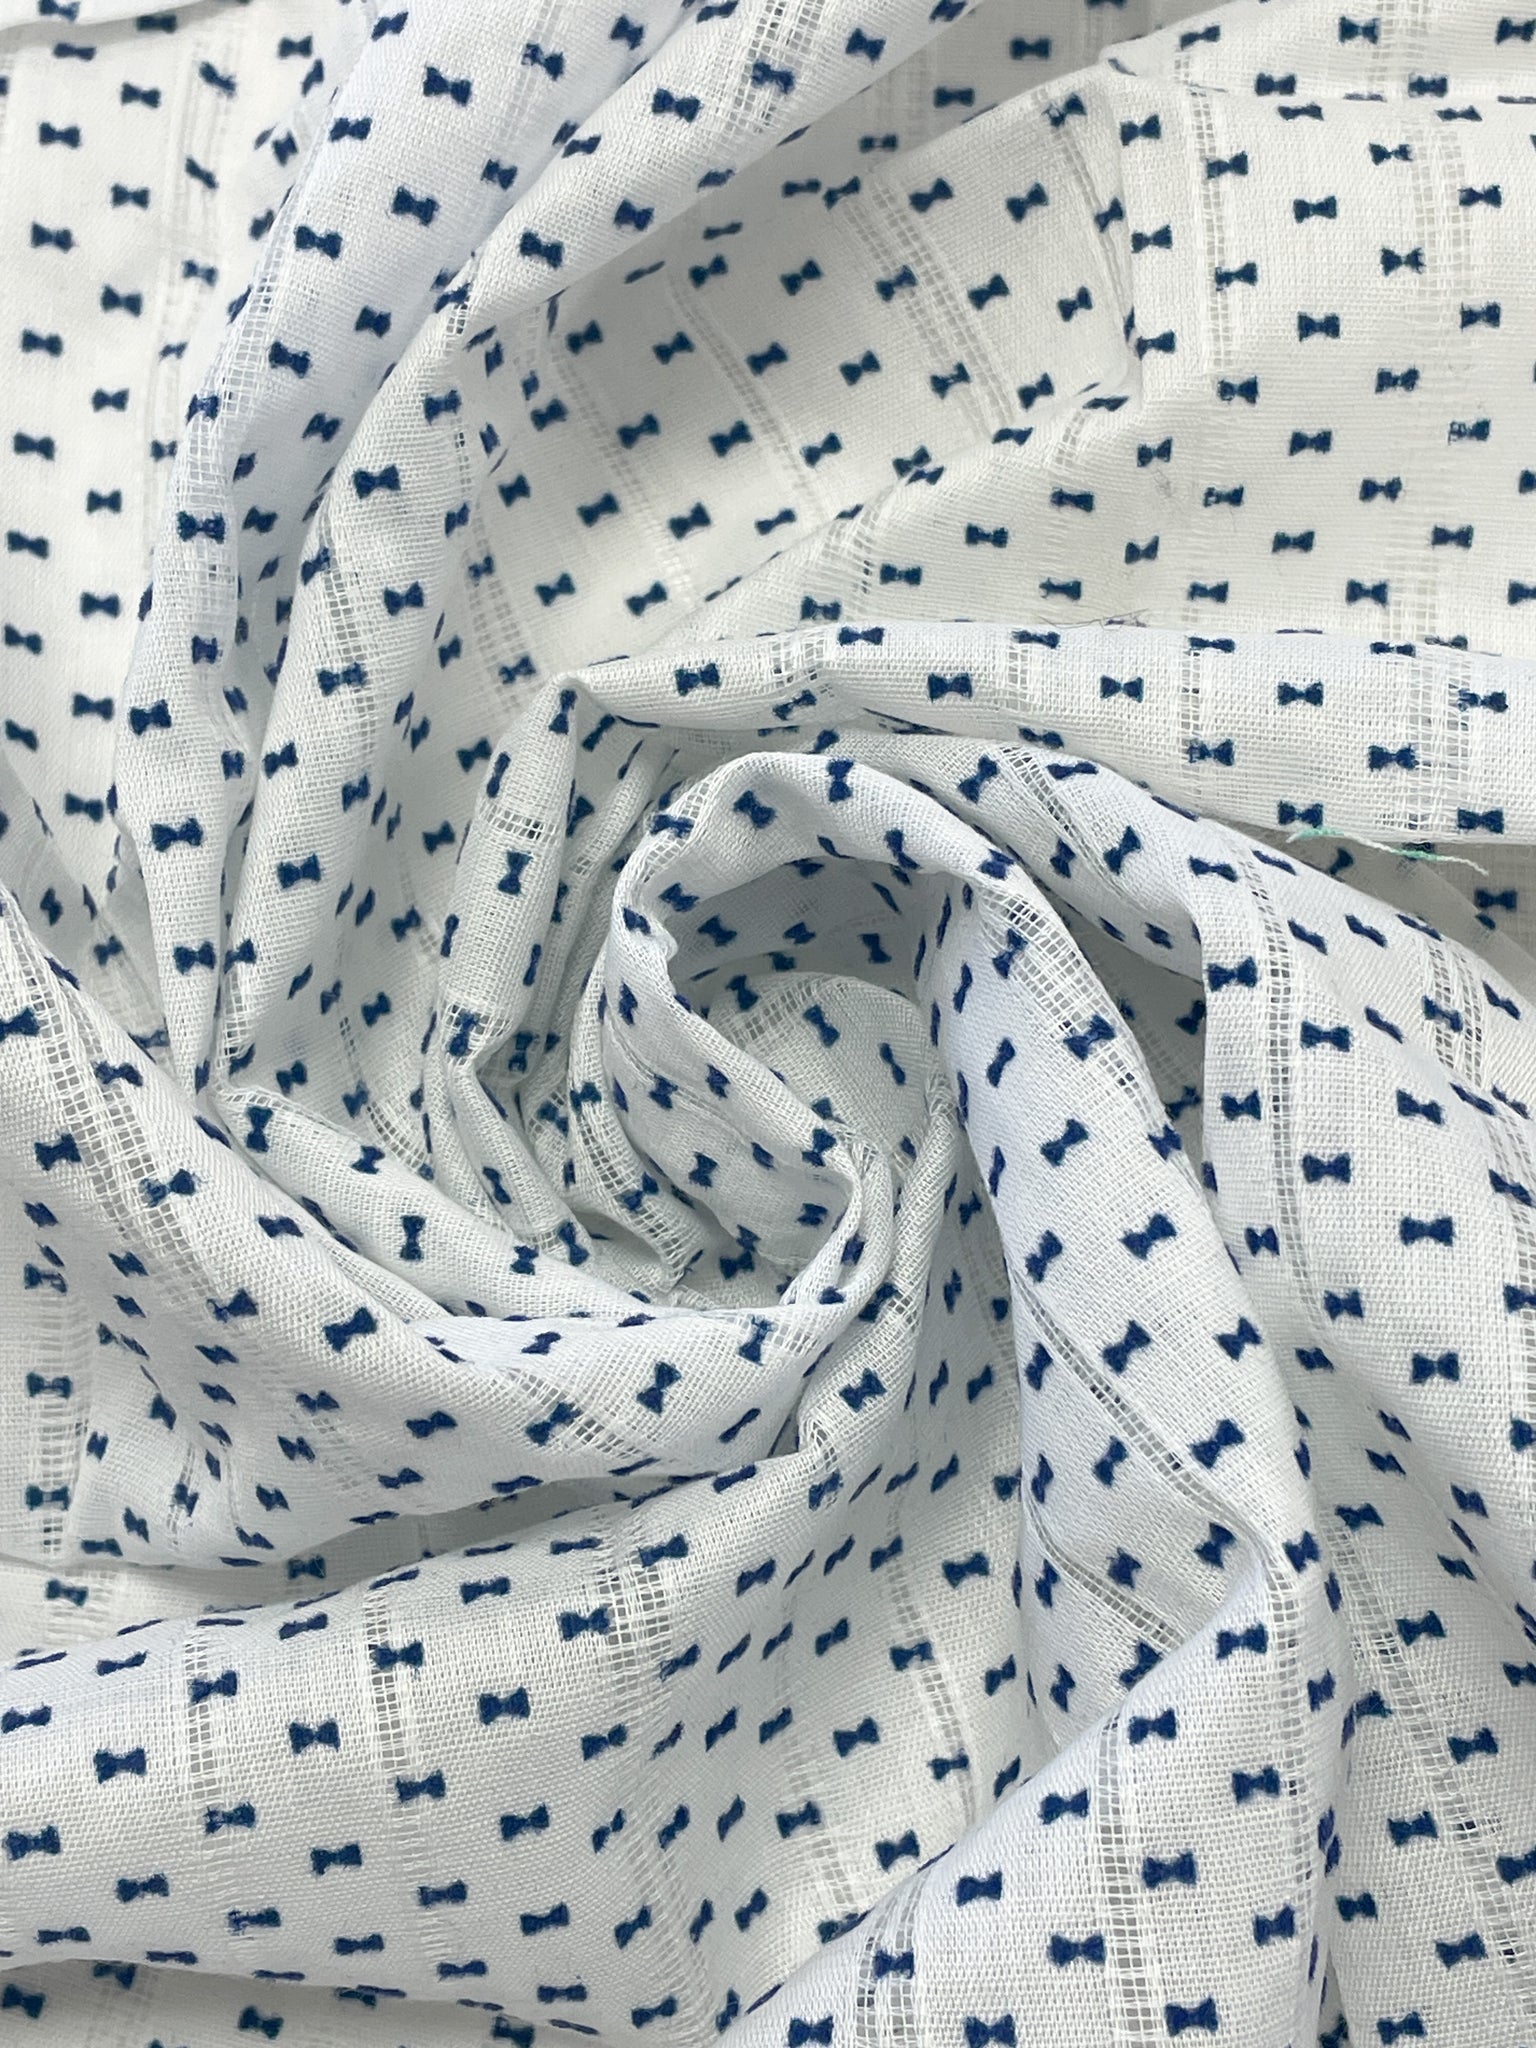 Cotton Blend Voile Remnant - White with Blue Flocked Bows